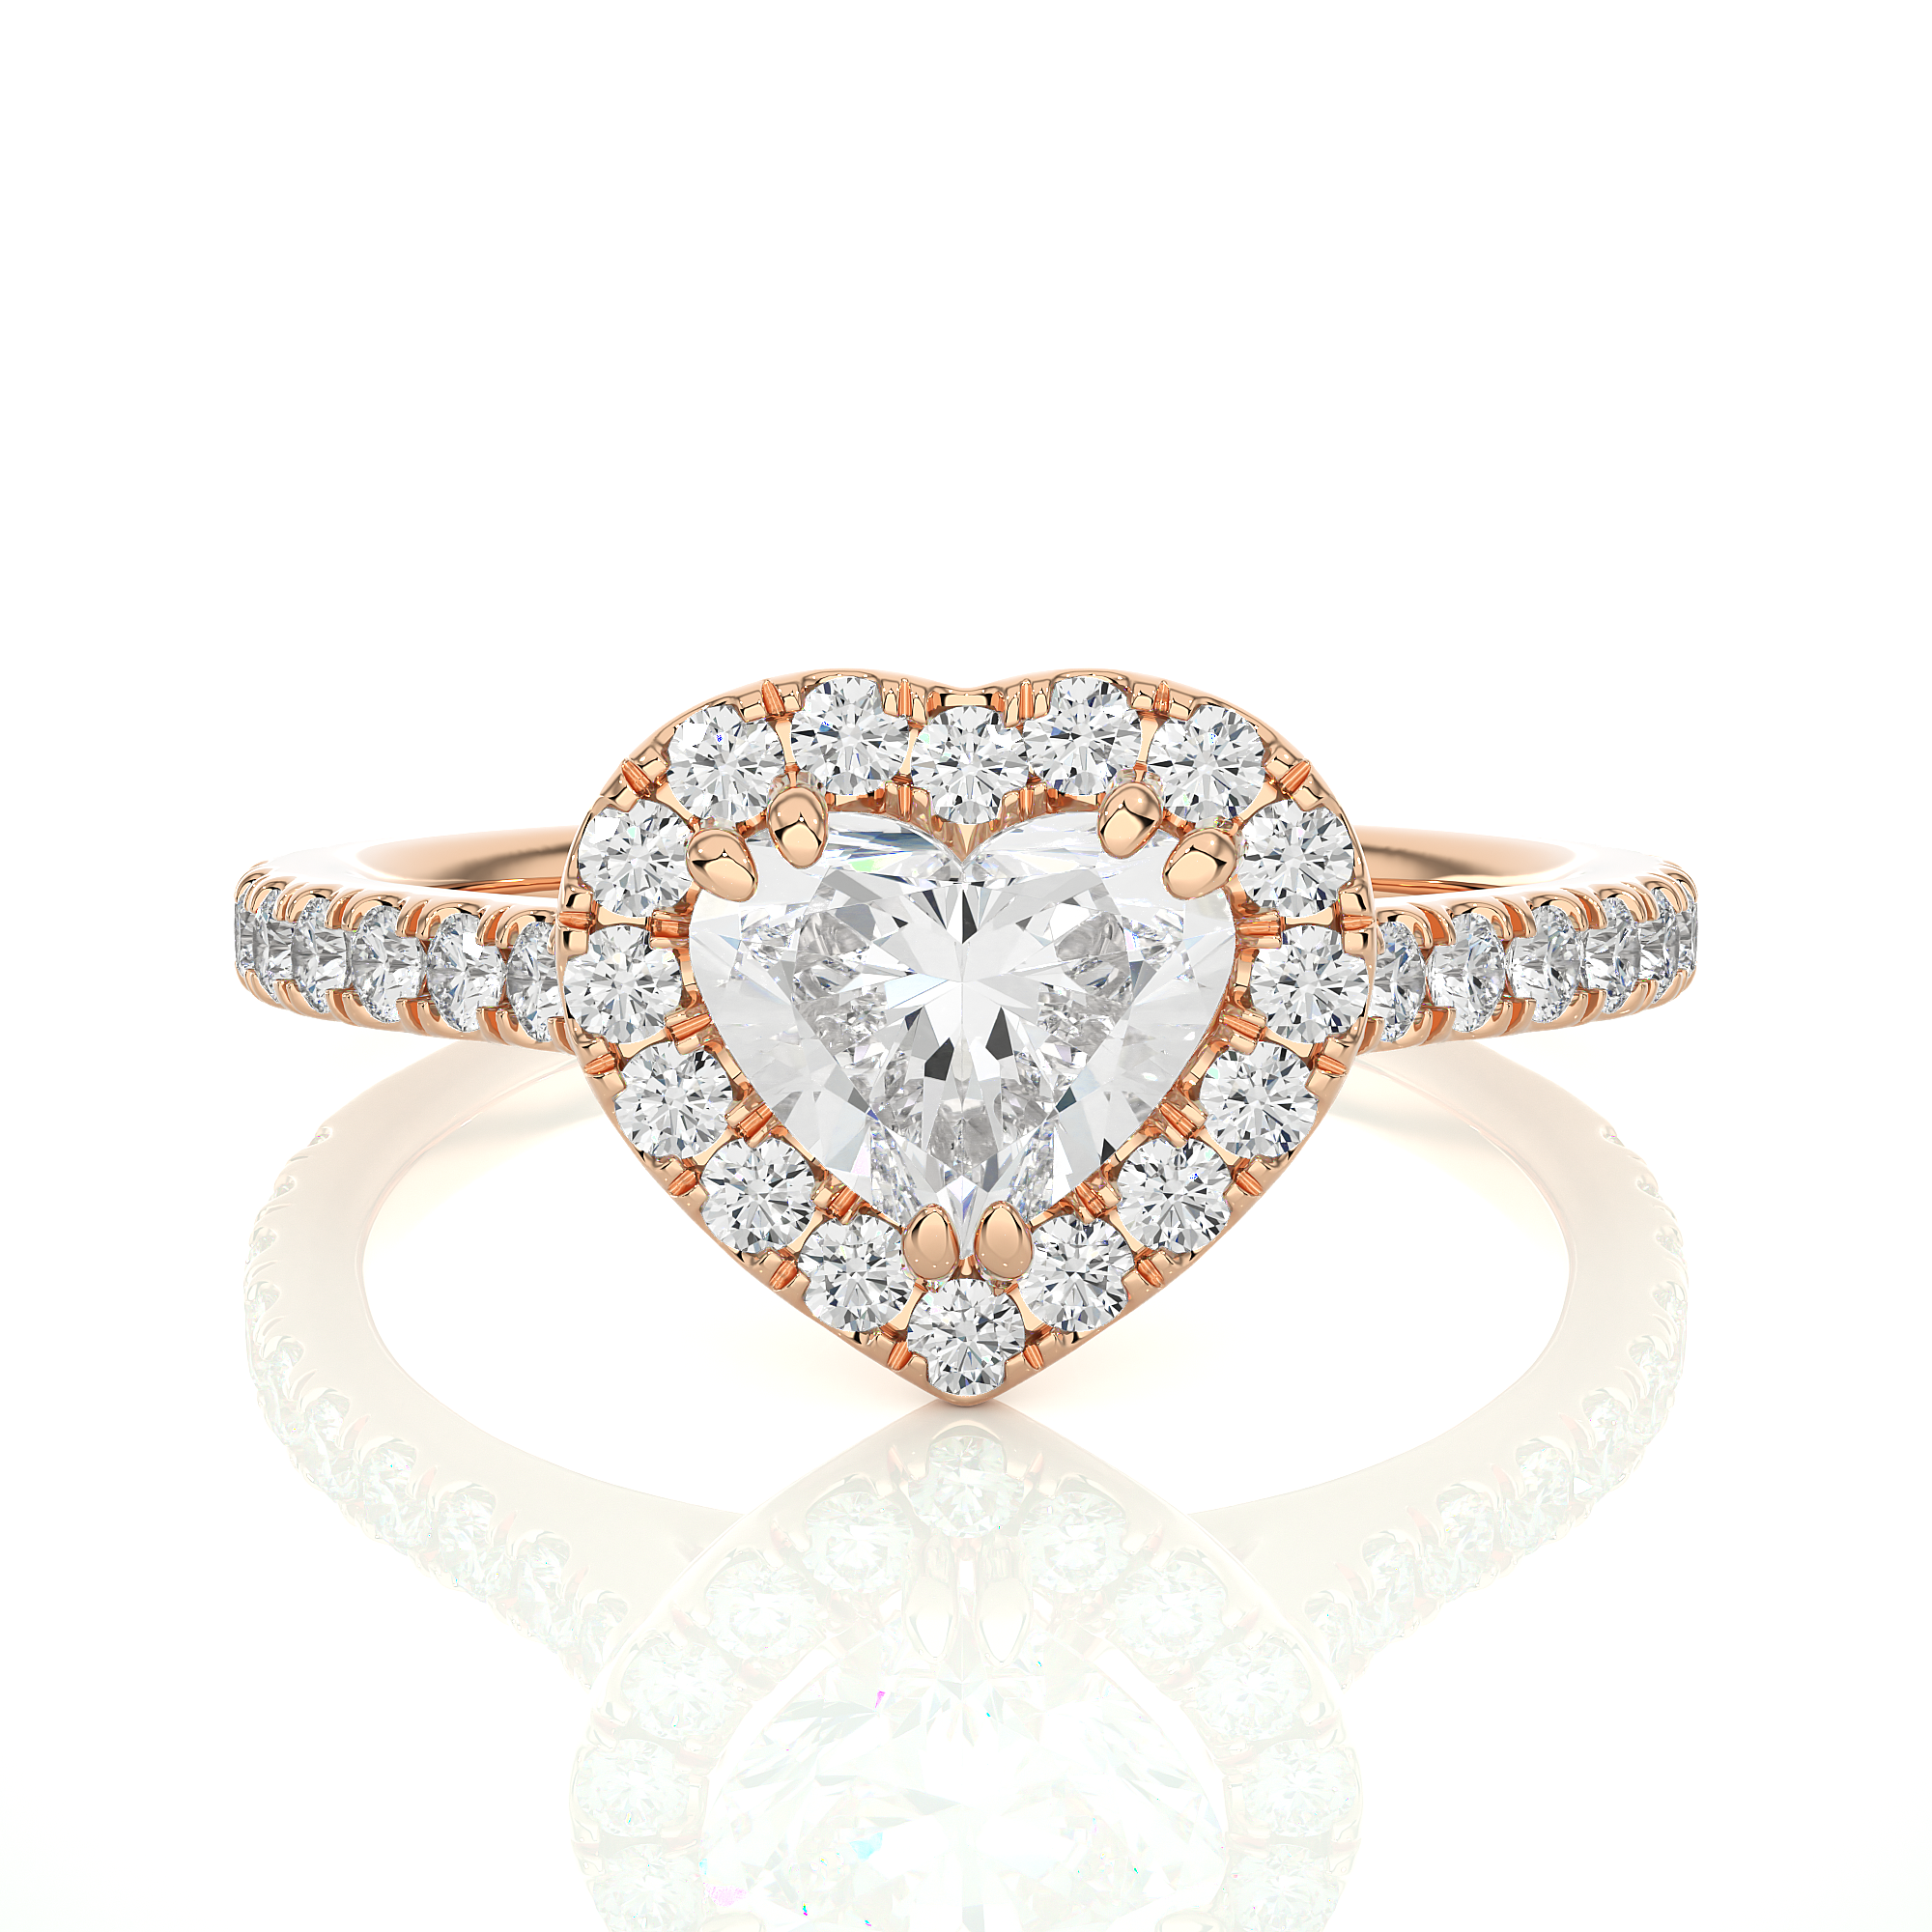 1.33 Ct Heart Shaped Solitaire Diamond Ring in 14Kt Rose Gold - Blu Diamonds